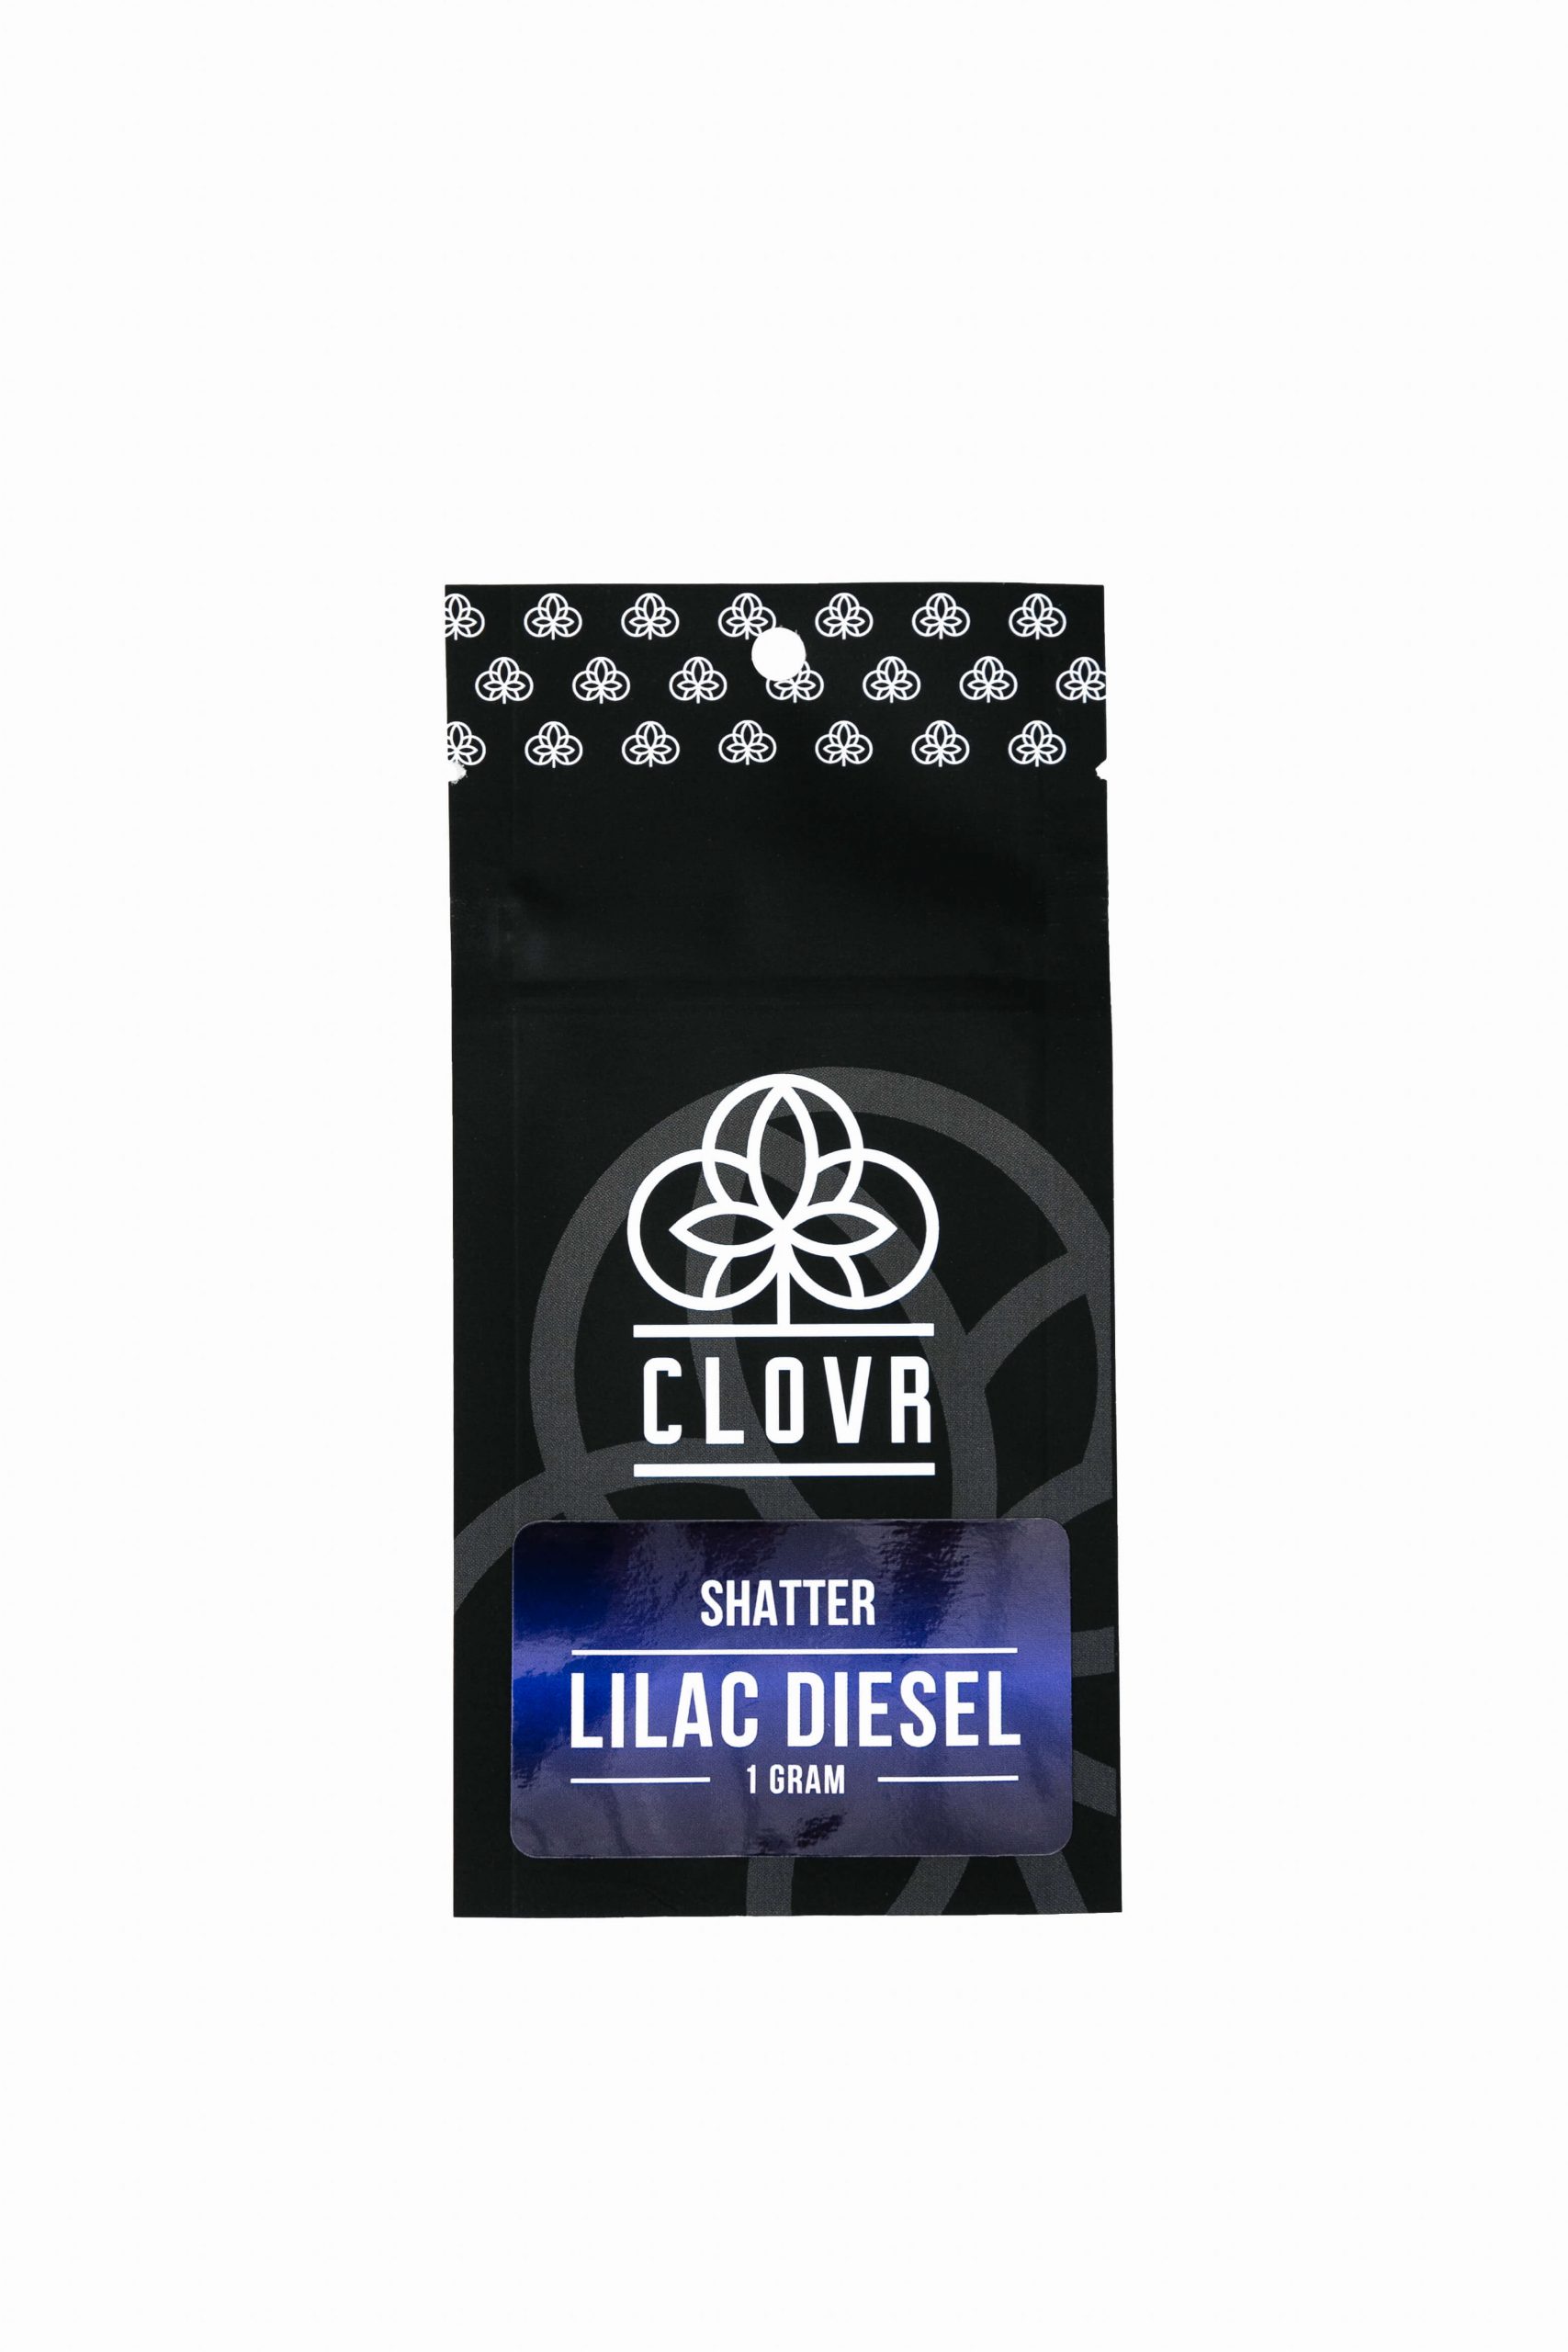 clovr marijuana shatter concentrate lilac diesel packaging